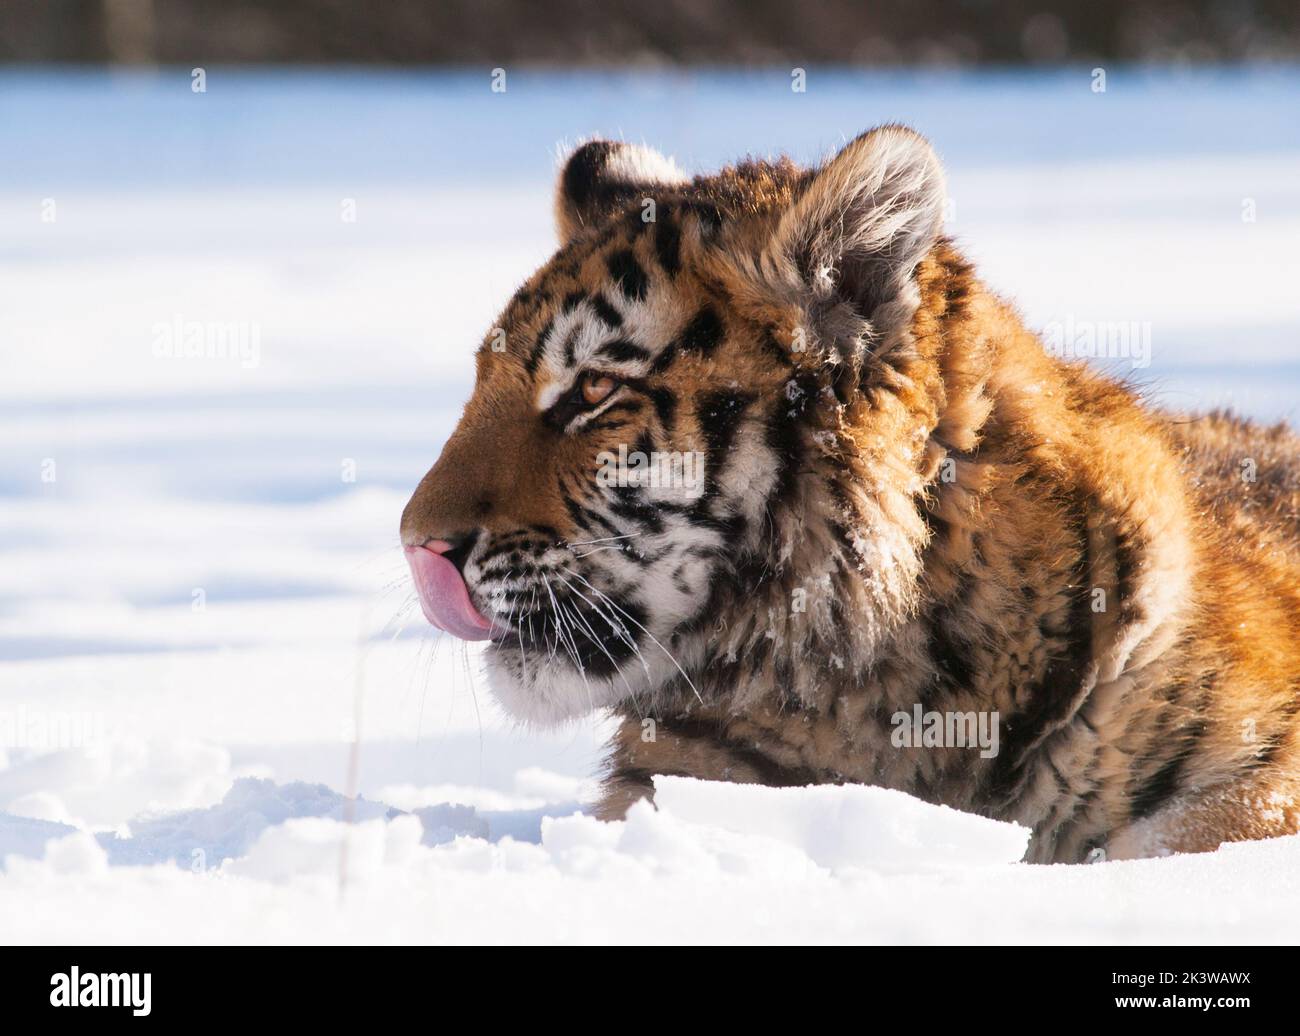 Siberian tiger, Panthera tigris altaica. Wildlife scene with dangerous animal. Cold winter in taiga, Russia. Tiger in wild winter nature, lying on sno Stock Photo